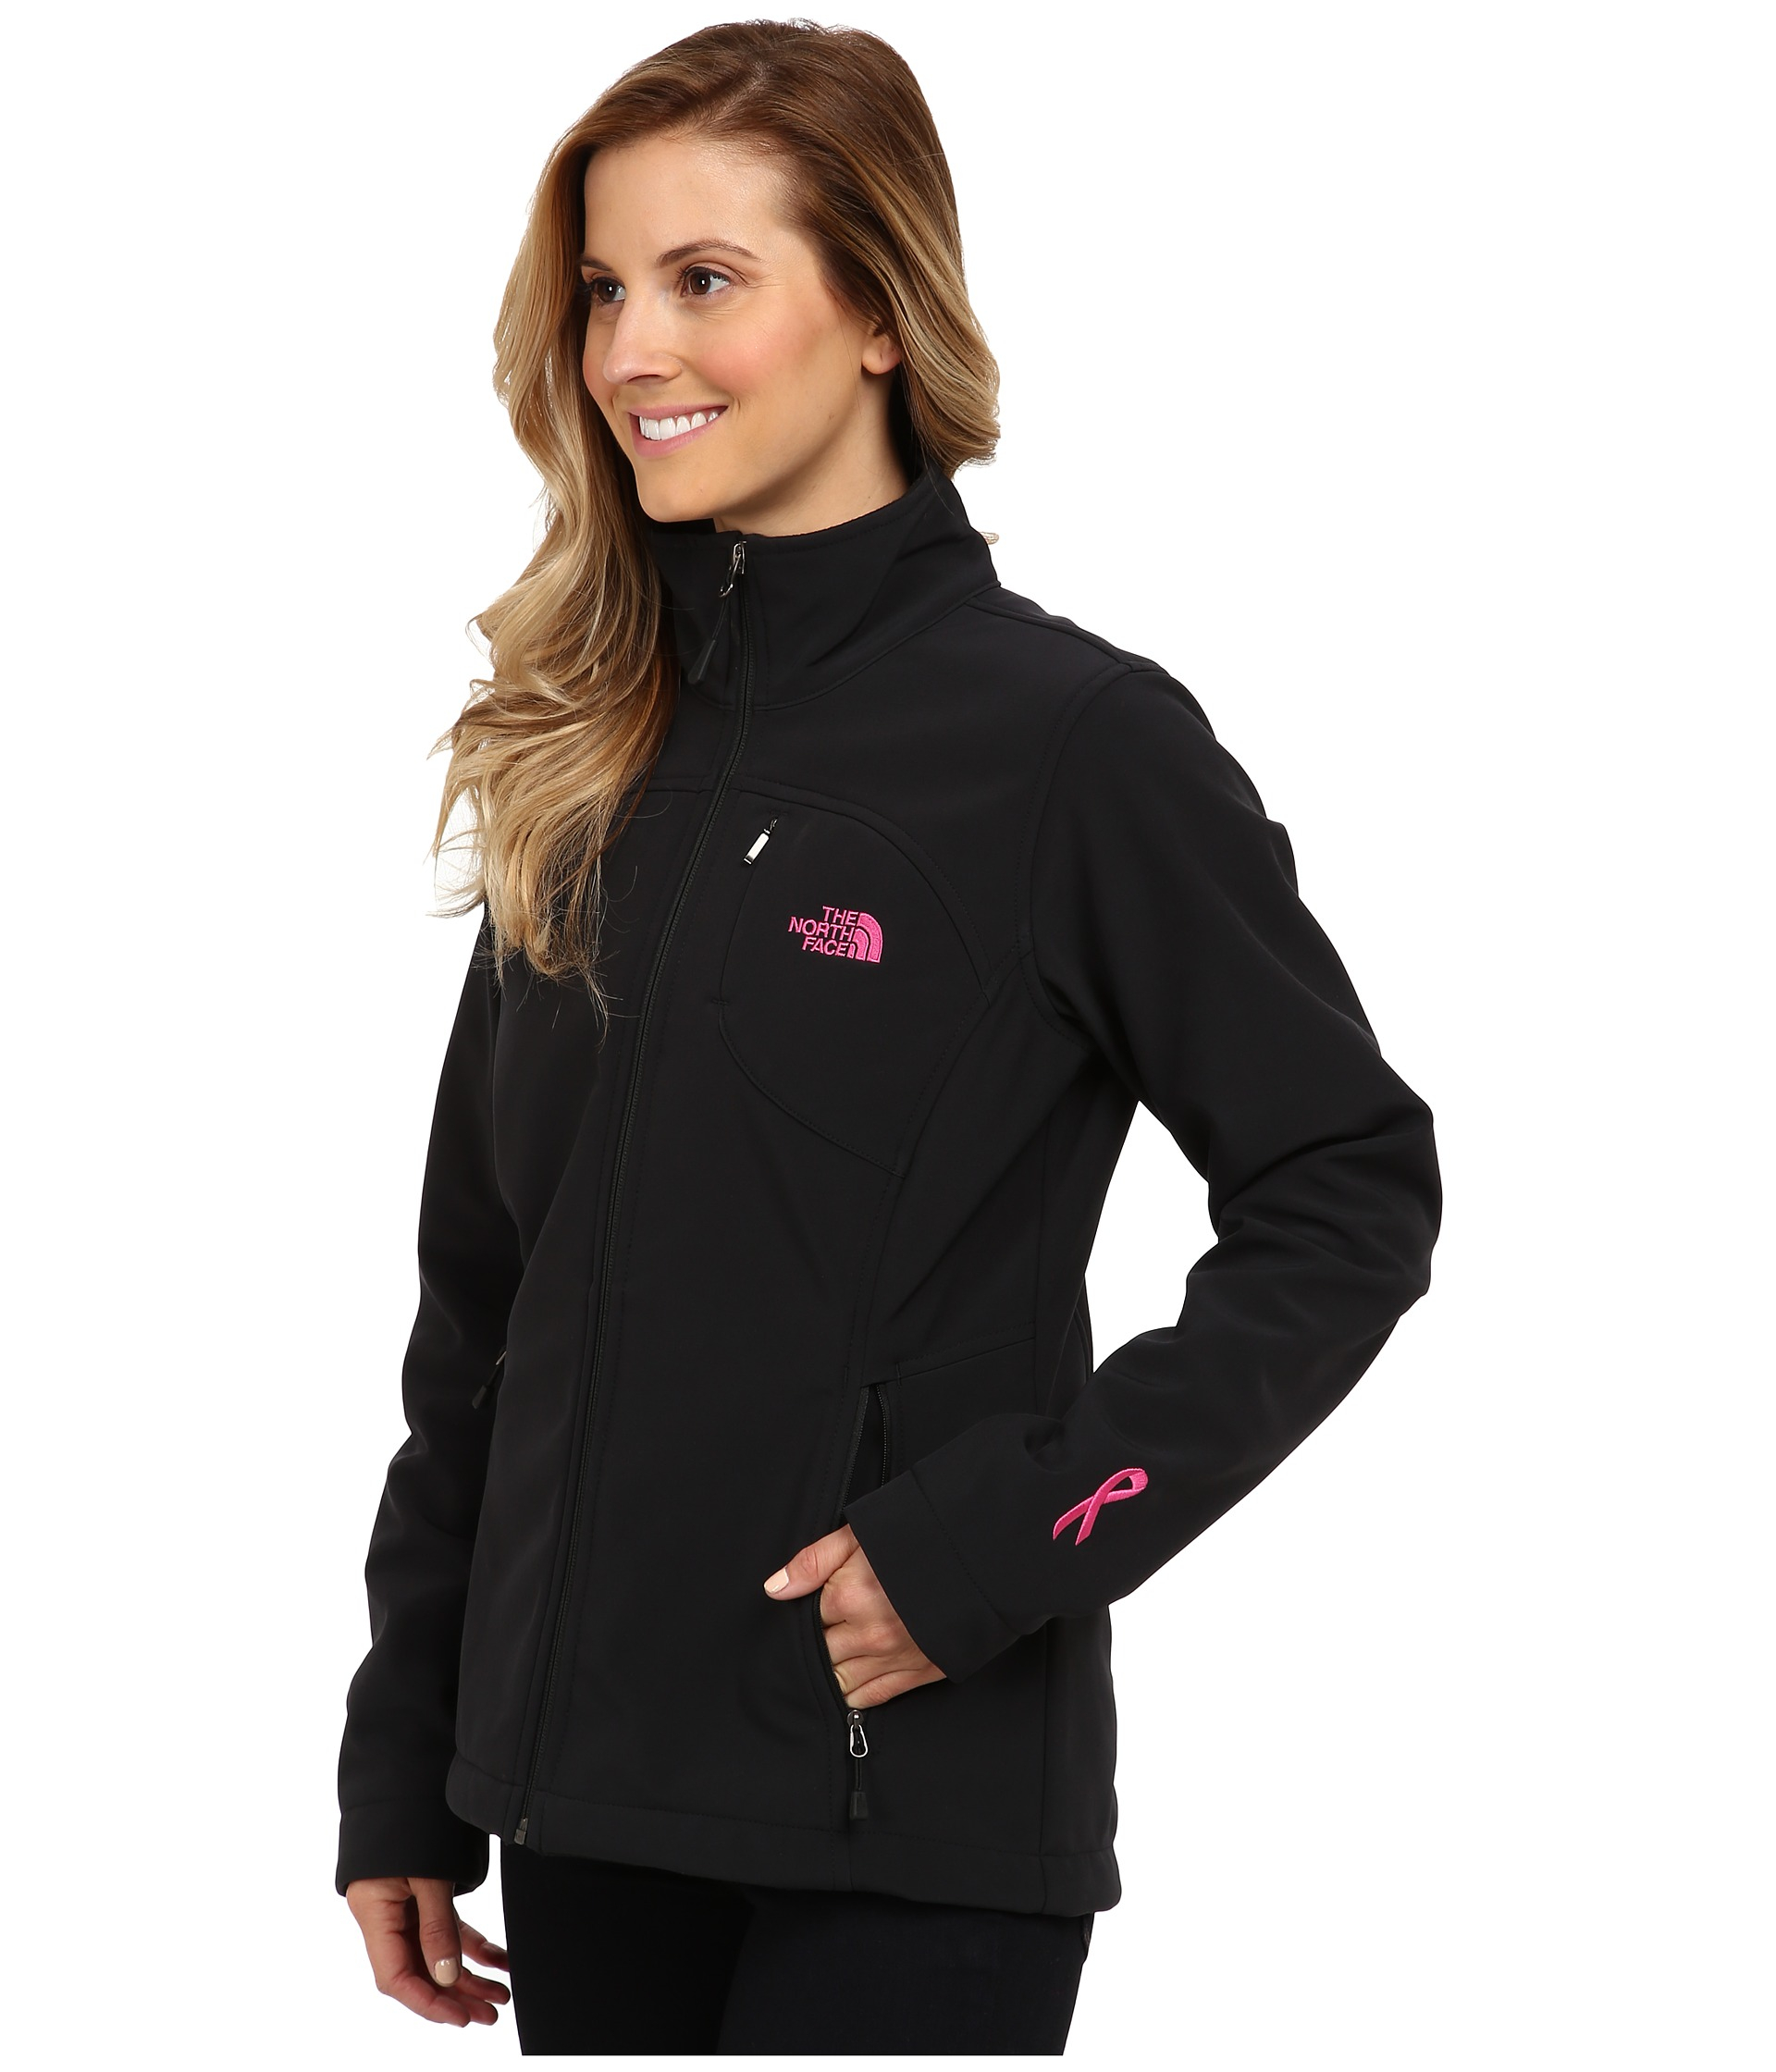 north face women's jacket black and pink